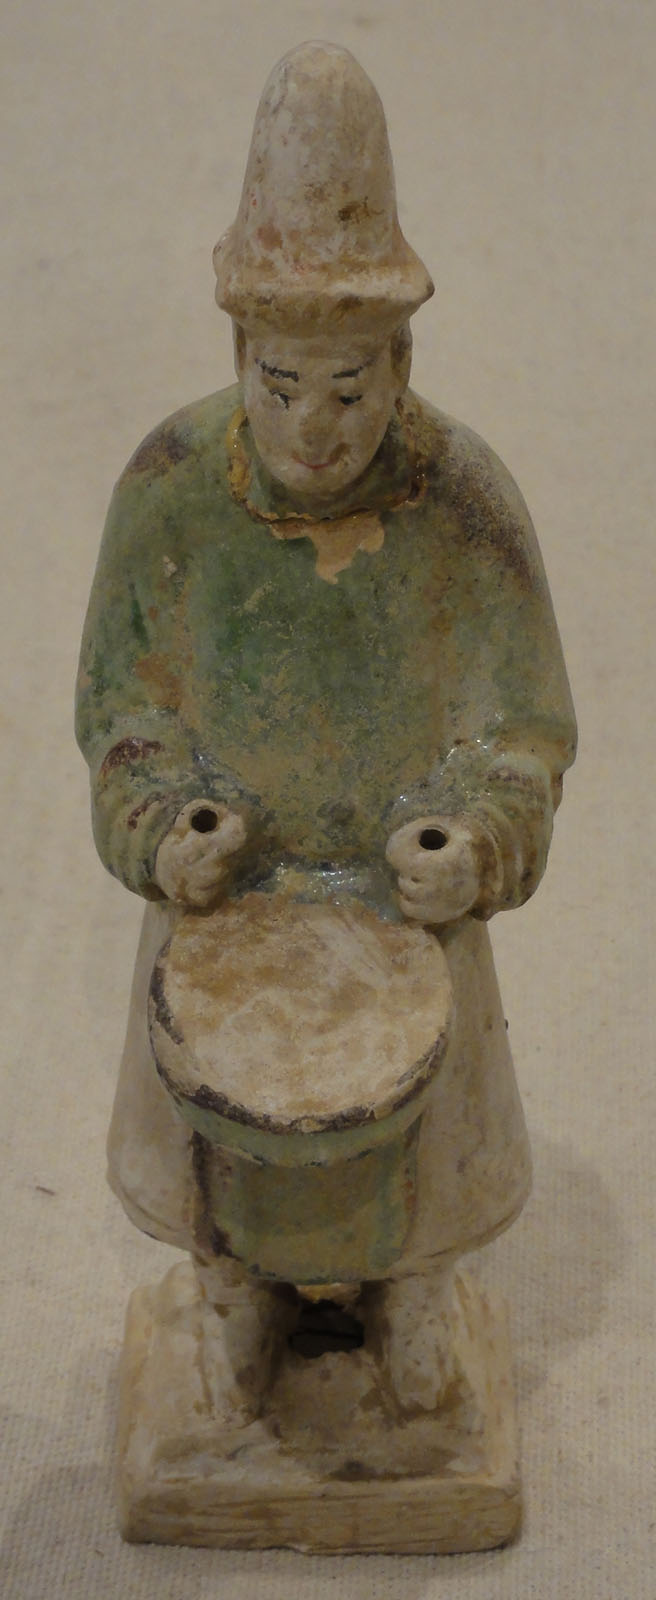 Tang Dynasty Clay Drummer Tomb Figure. Santa Barbara Design Center. Hand-crafted from China. A work of art and a part of history.